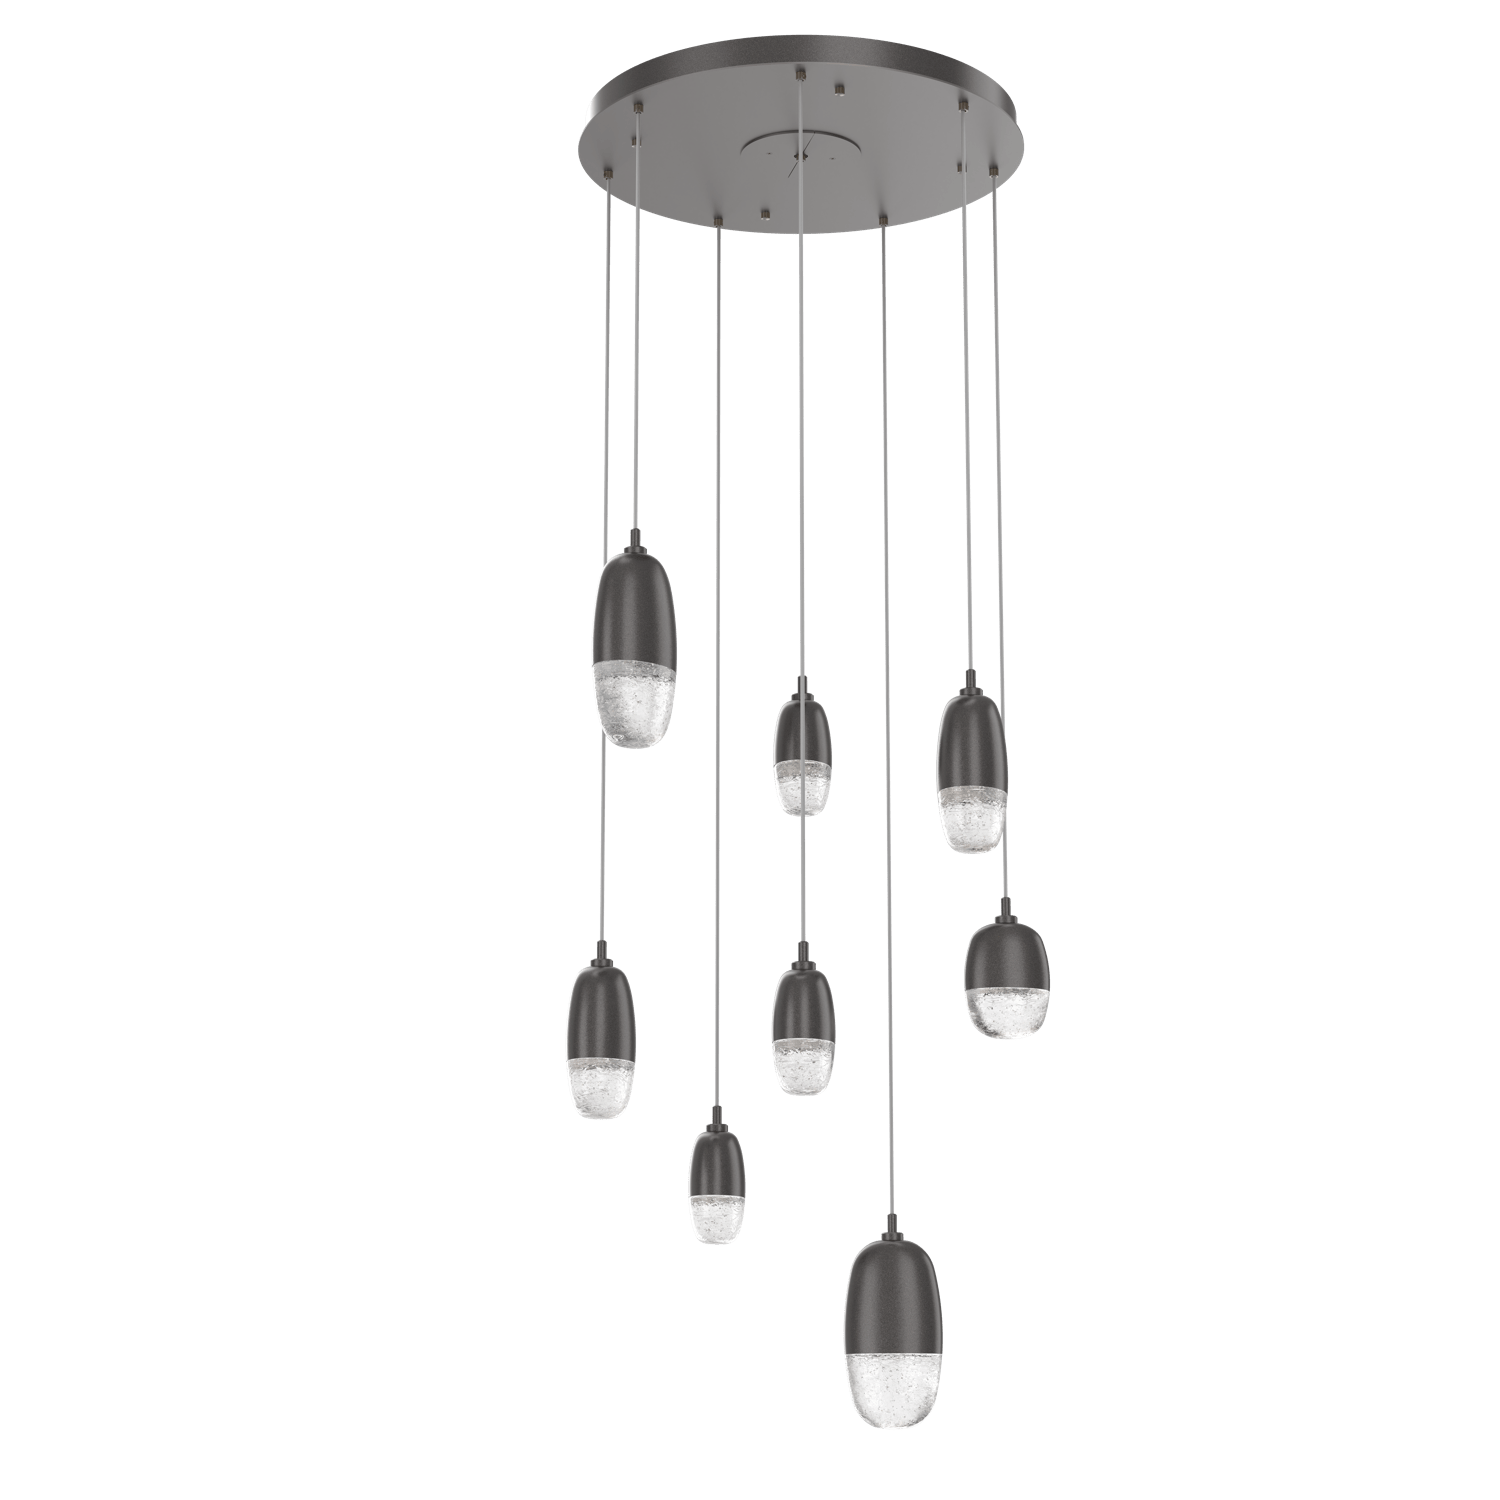 CHB0079-08-GP-Hammerton-Studio-Pebble-8-light-round-pendant-chandelier-with-graphite-finish-and-clear-cast-glass-shades-and-LED-lamping